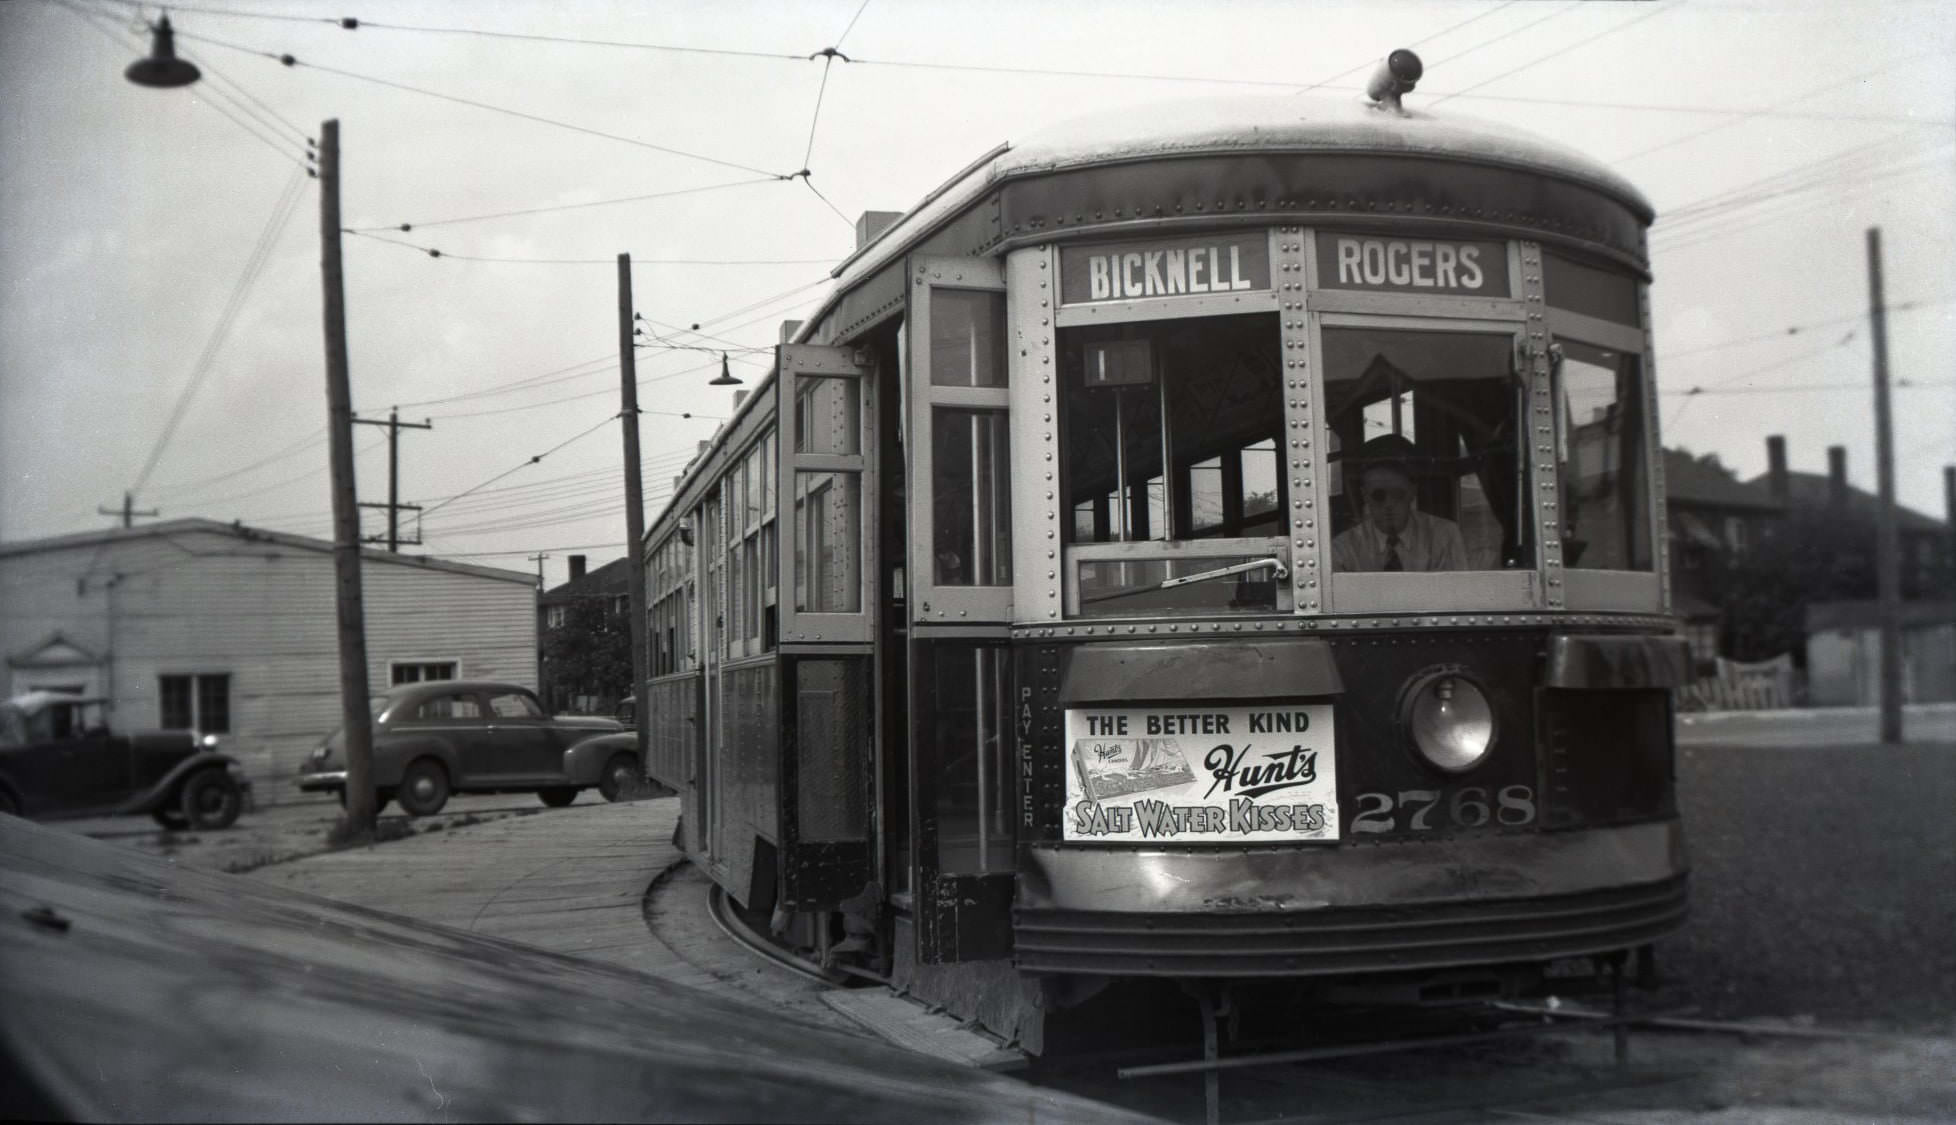 TTC Streetcar 2768 at the Bicknell Loop on the 2nd of July, 1948.